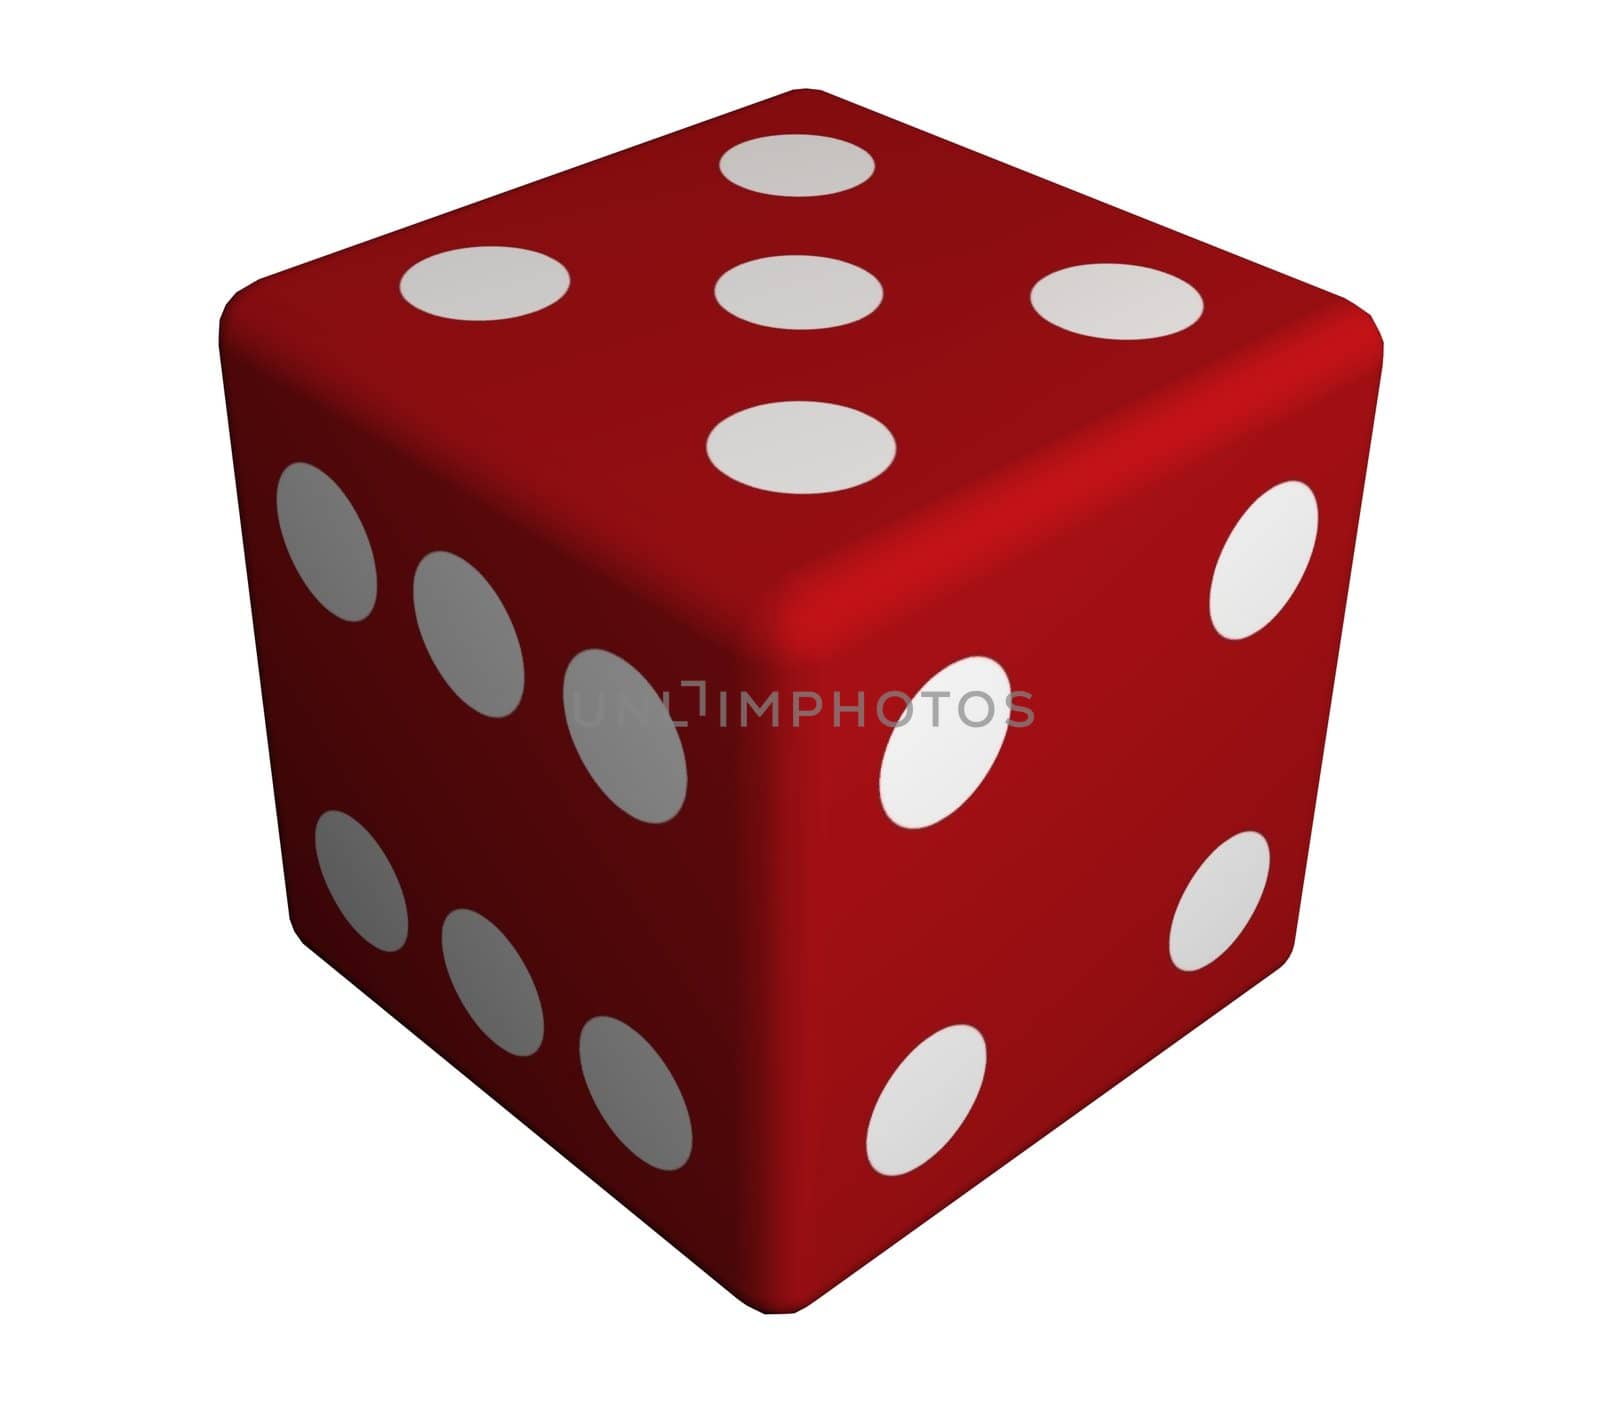 Illustration of a large red die
